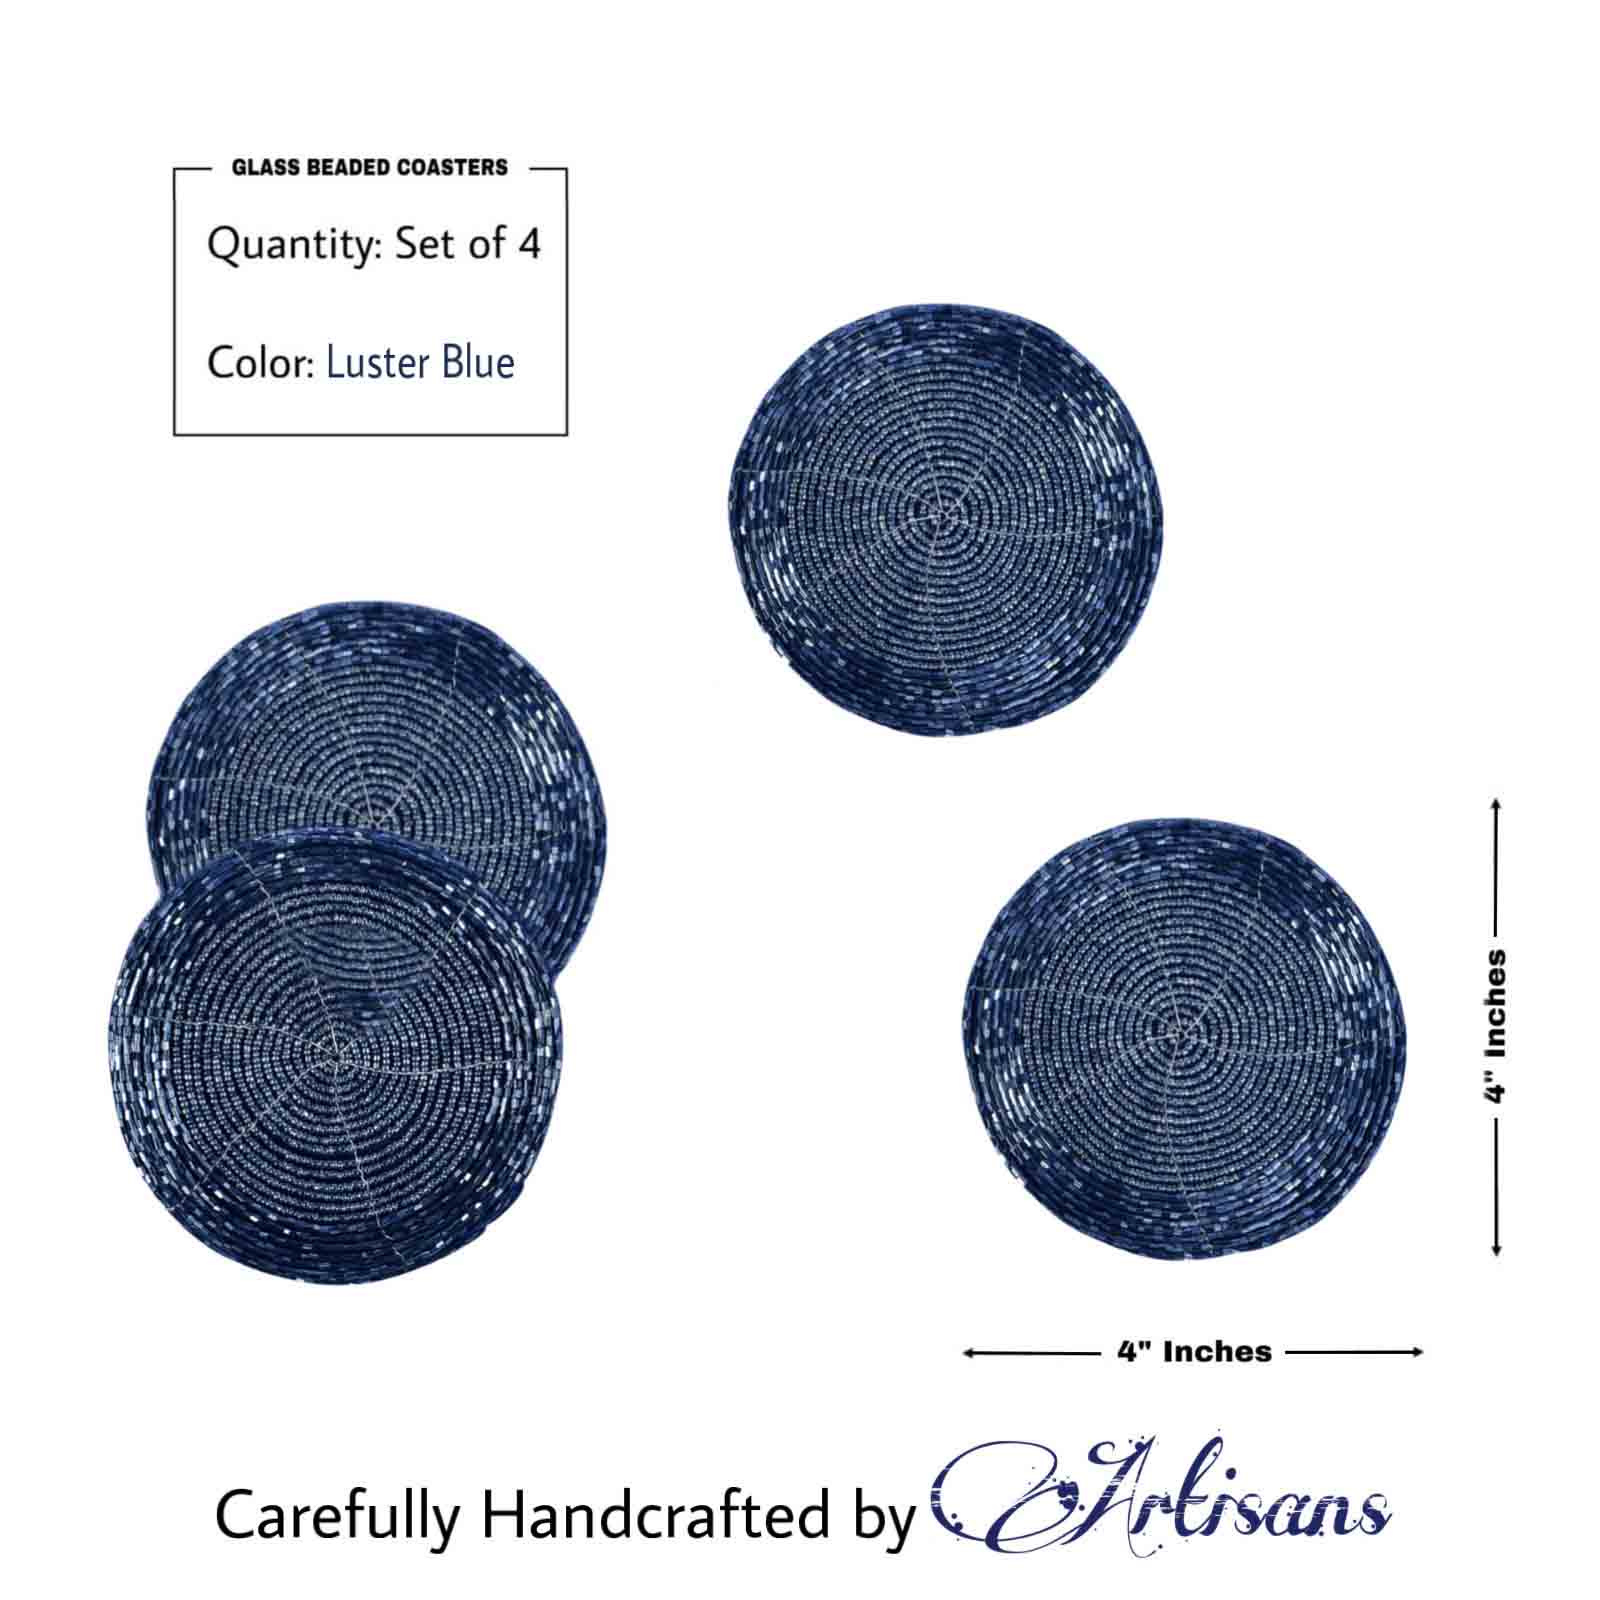 Glass Beaded Coaster<br>Color: Luster Blue<br>Size: 4" Round<br>Set of 4